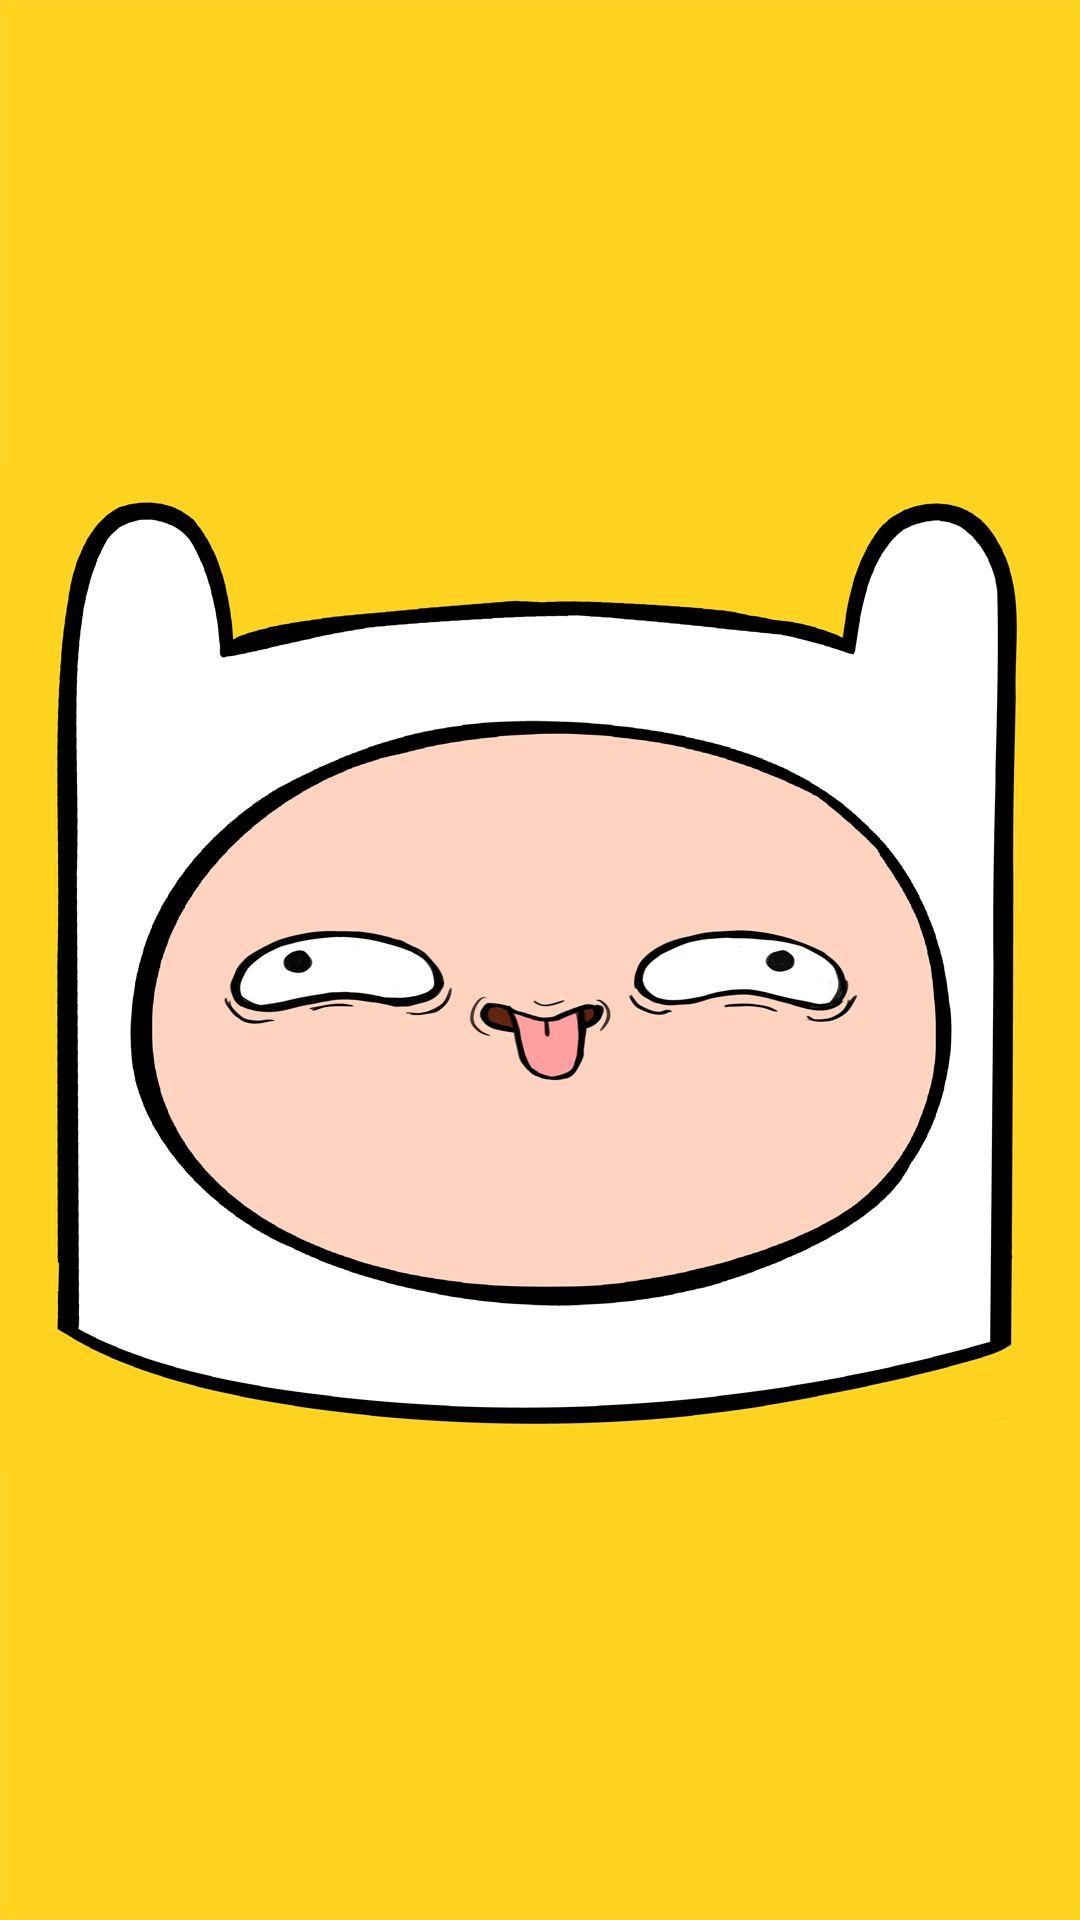 80 Finn Adventure Time HD Wallpapers and Backgrounds